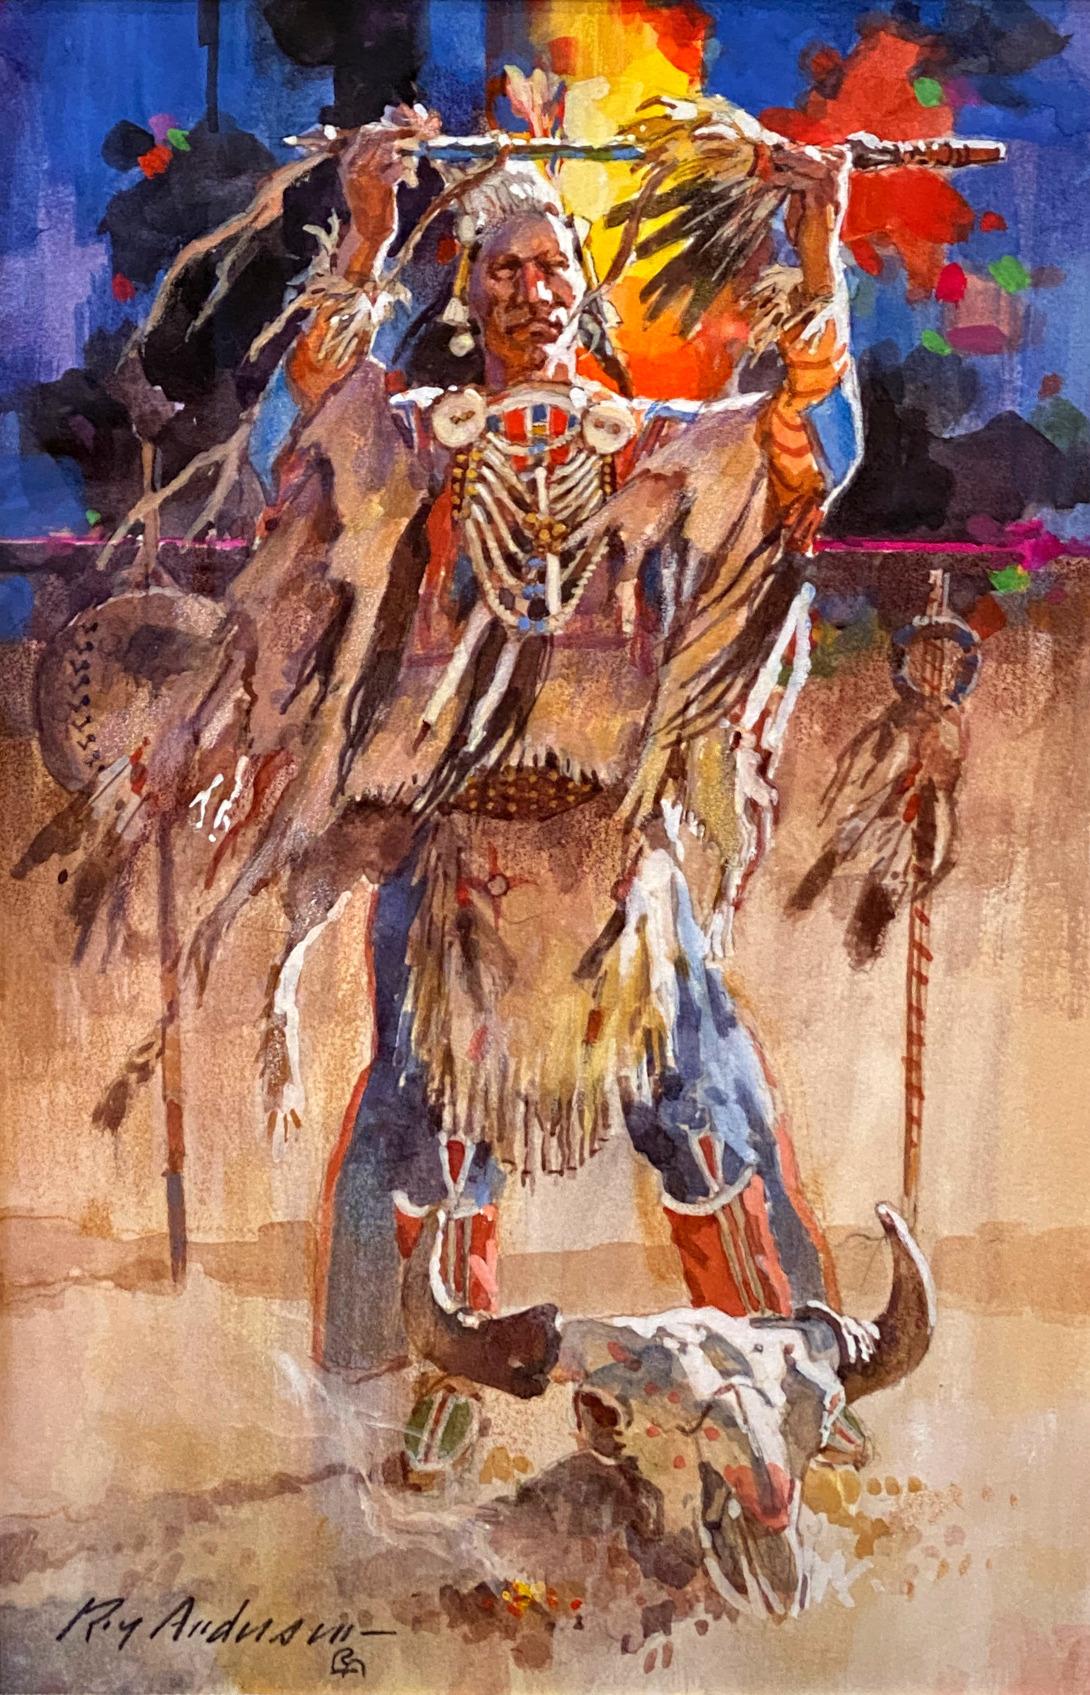 Roy Andersen Figurative Painting - "Warrior"  NATIVE AMERICAN INDIAN AWESOME